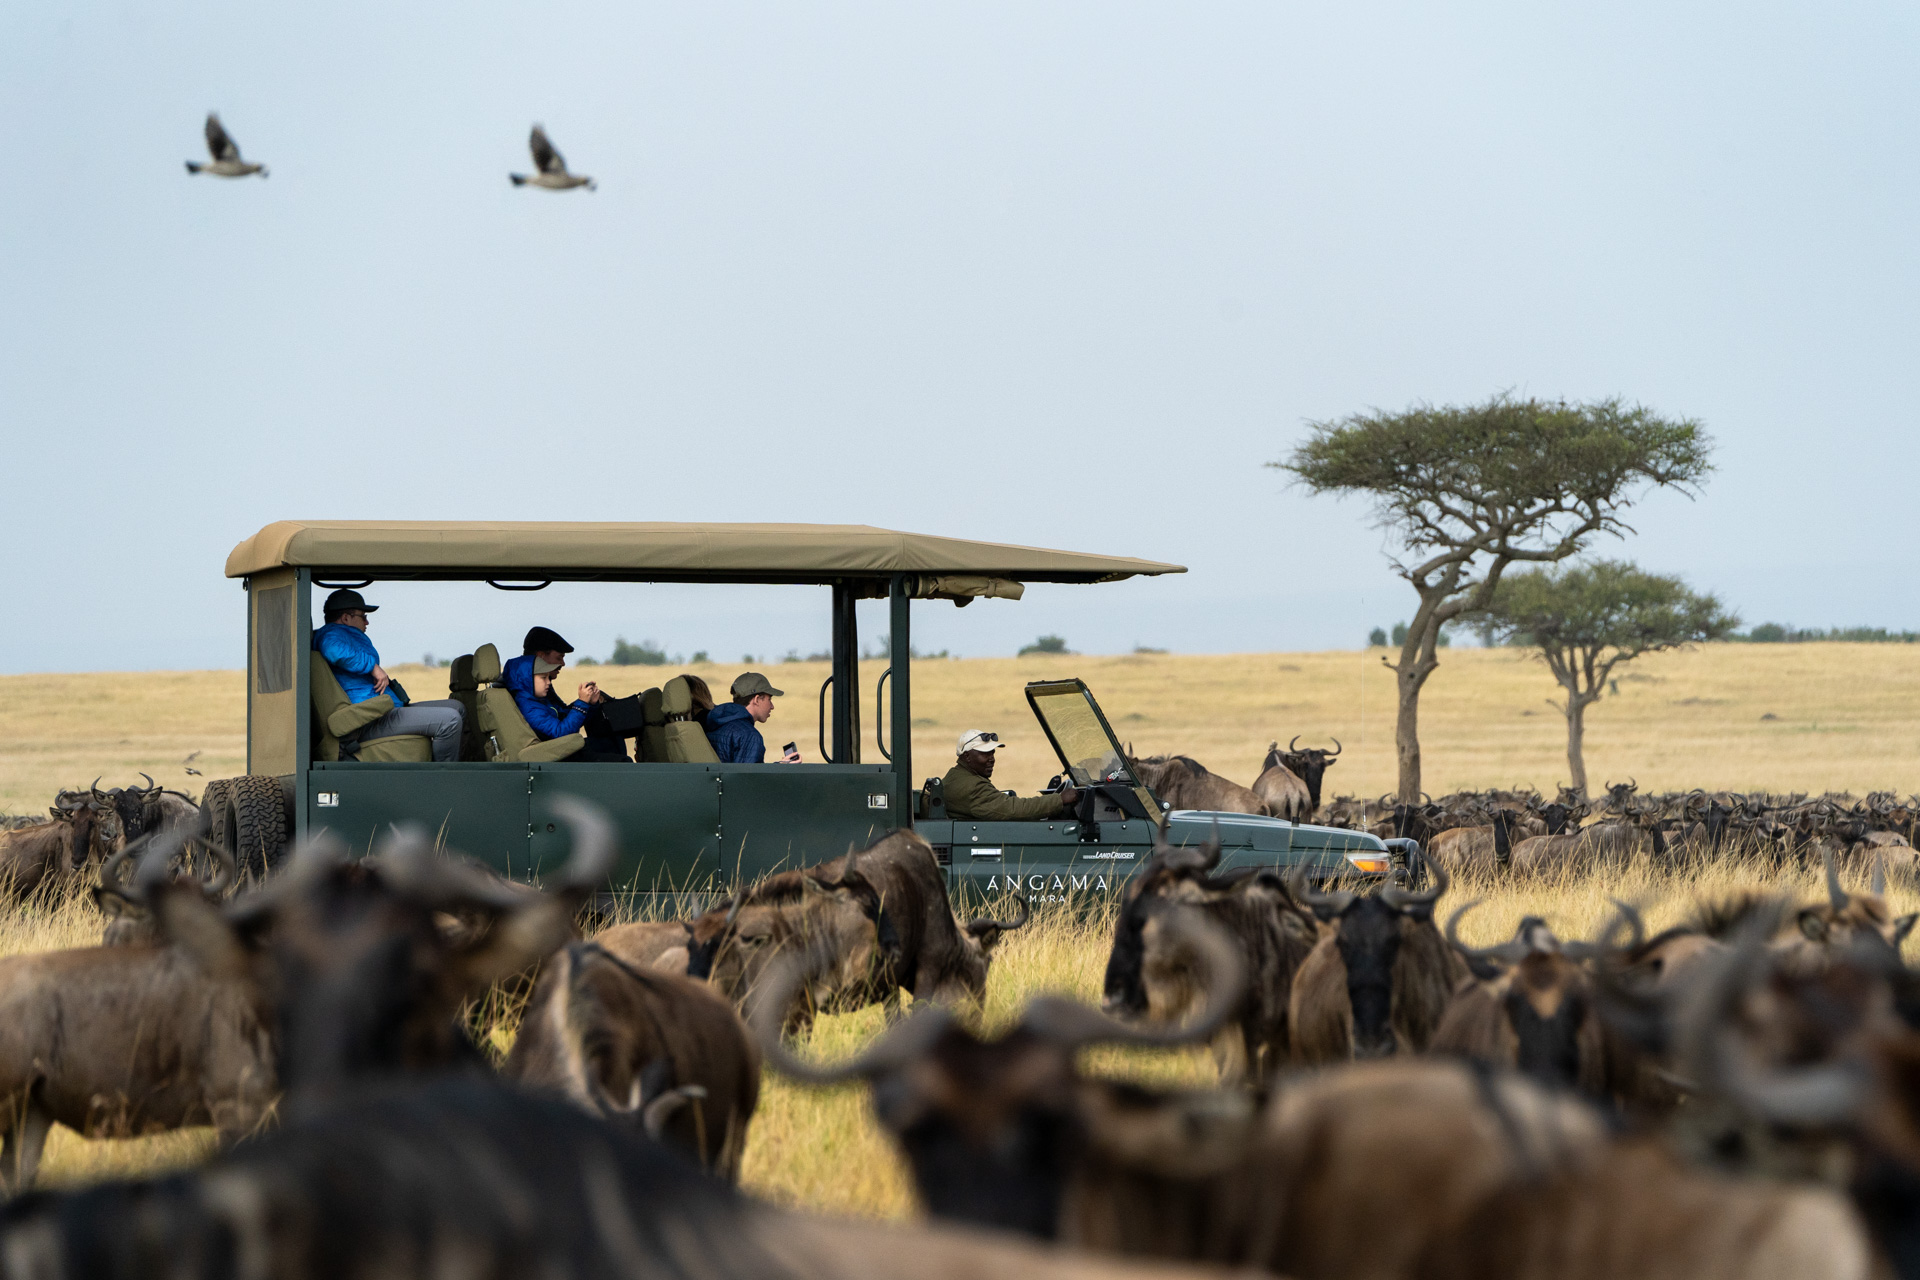 Game Drive in the Maasai Mara with the Great Migration